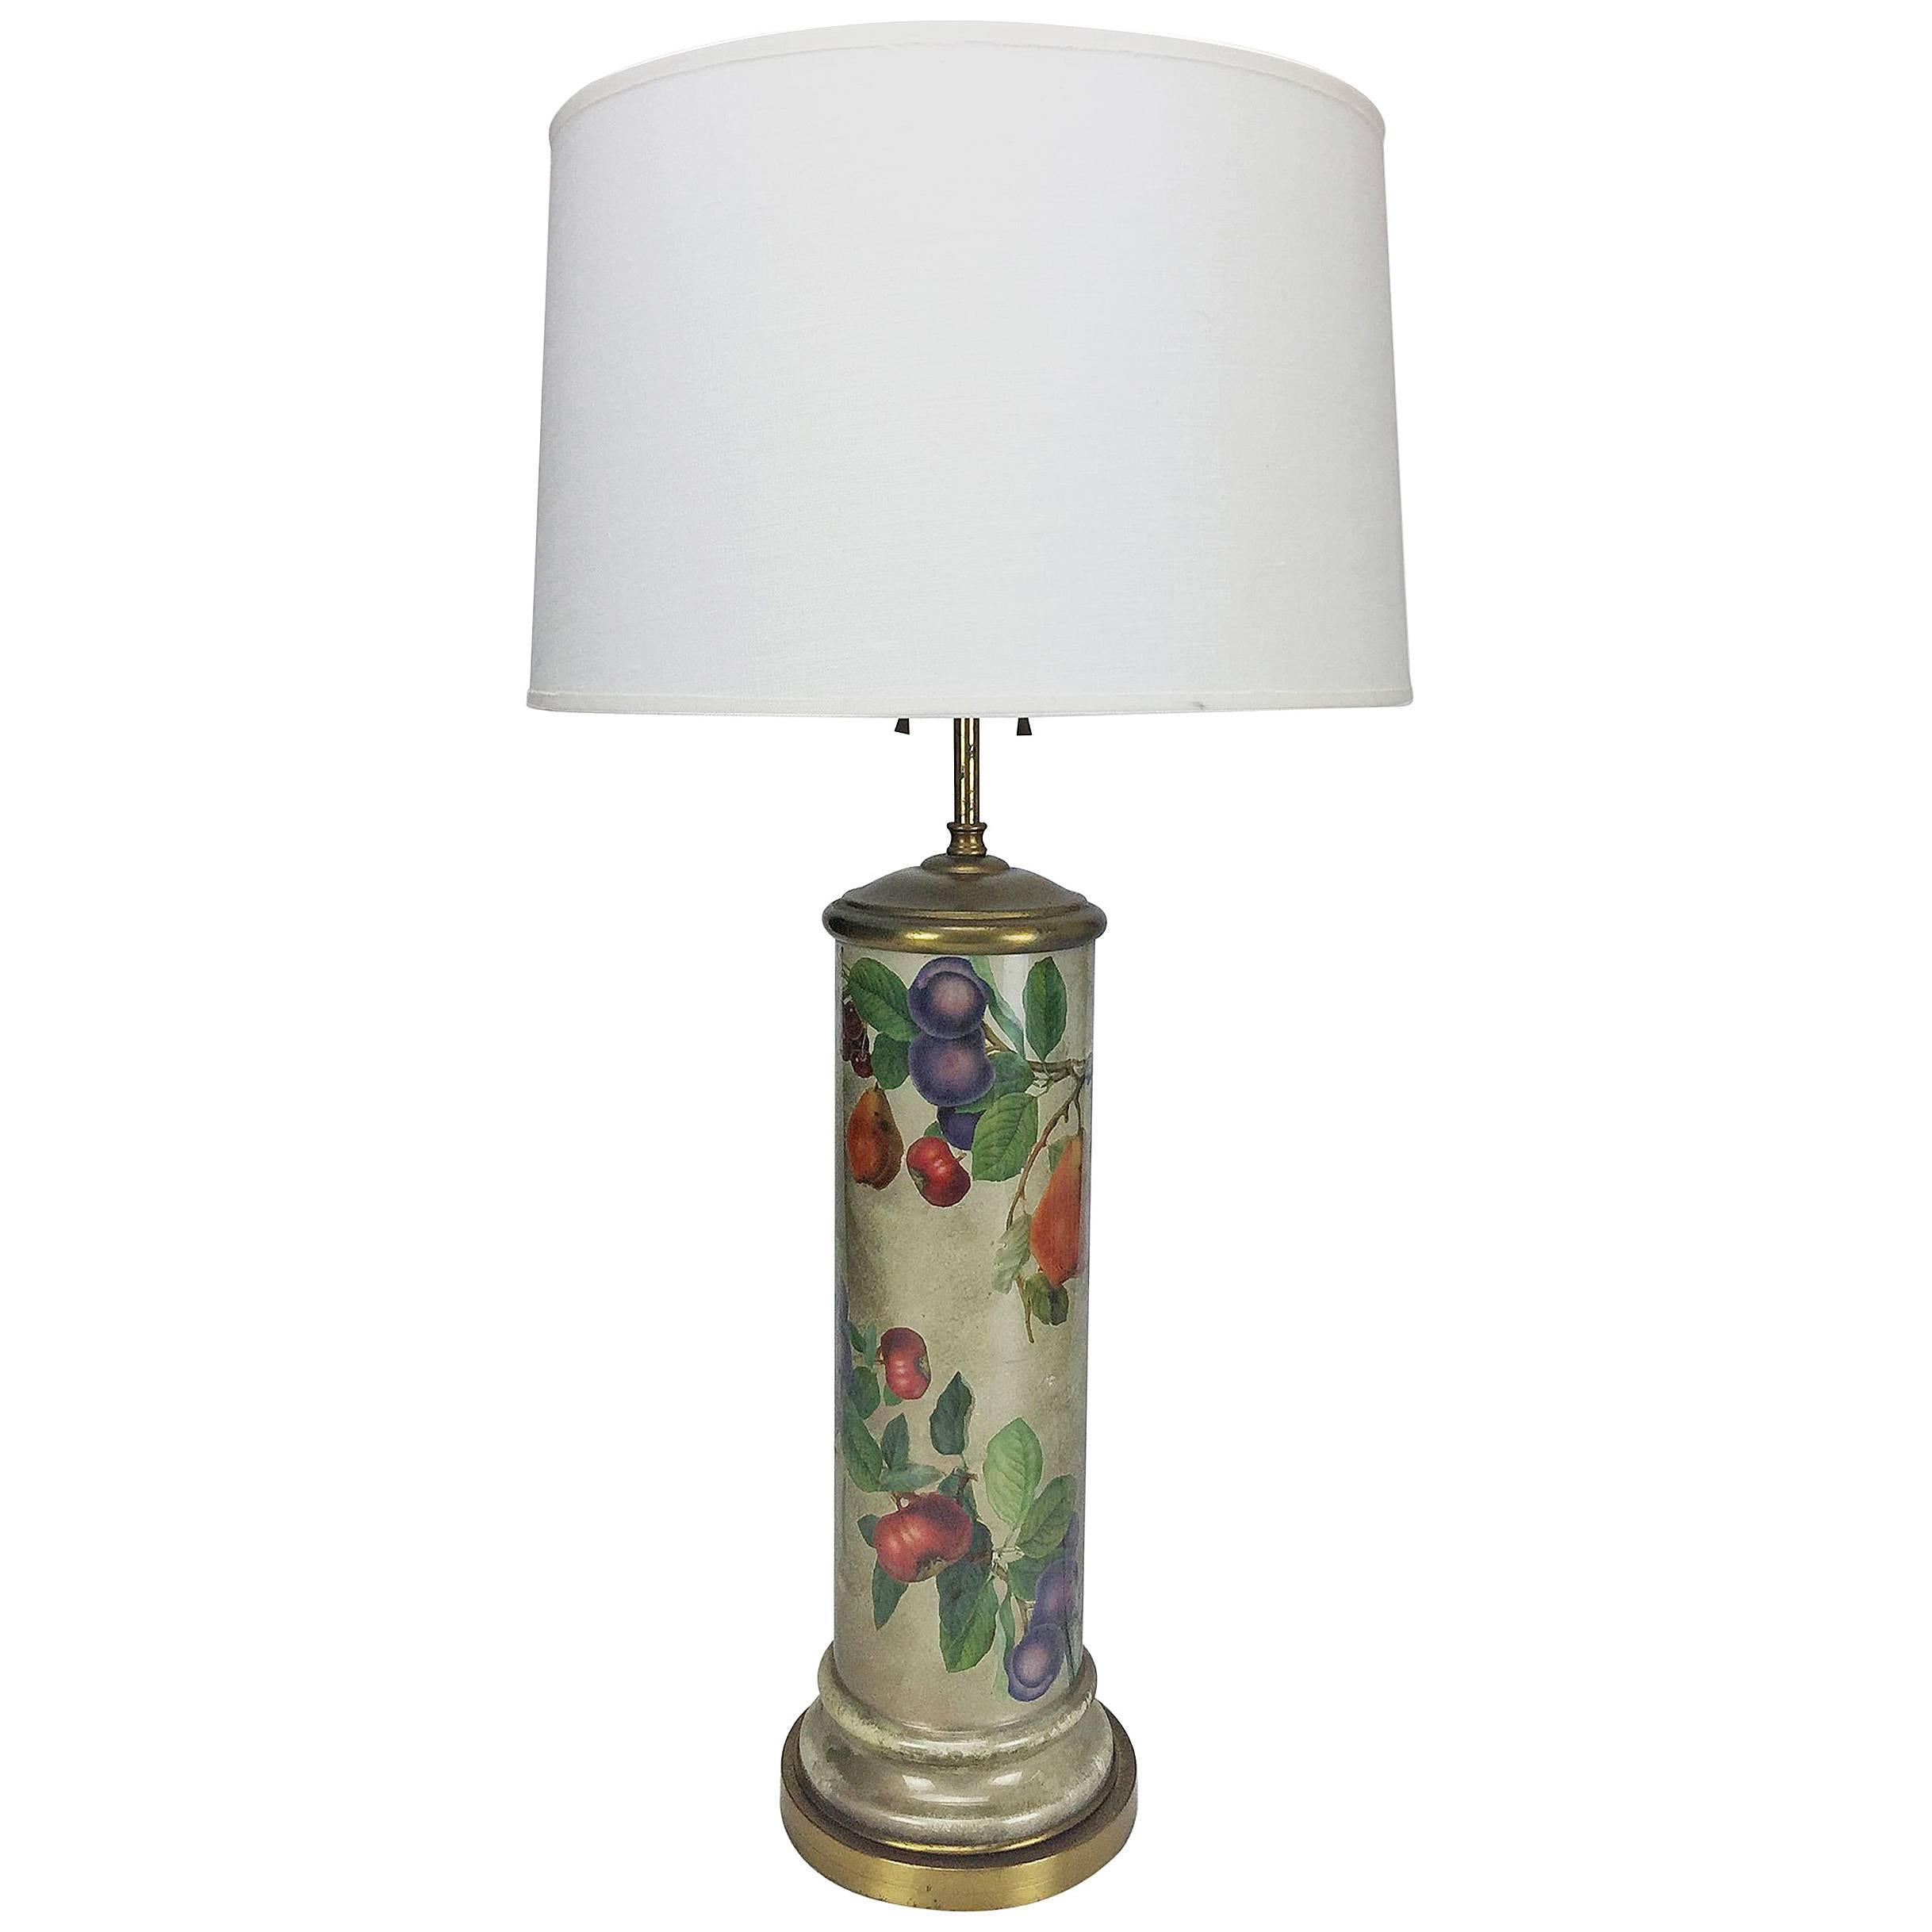 Mid-Century Decoupage Silvered Glass Table Lamp with Fruit Design